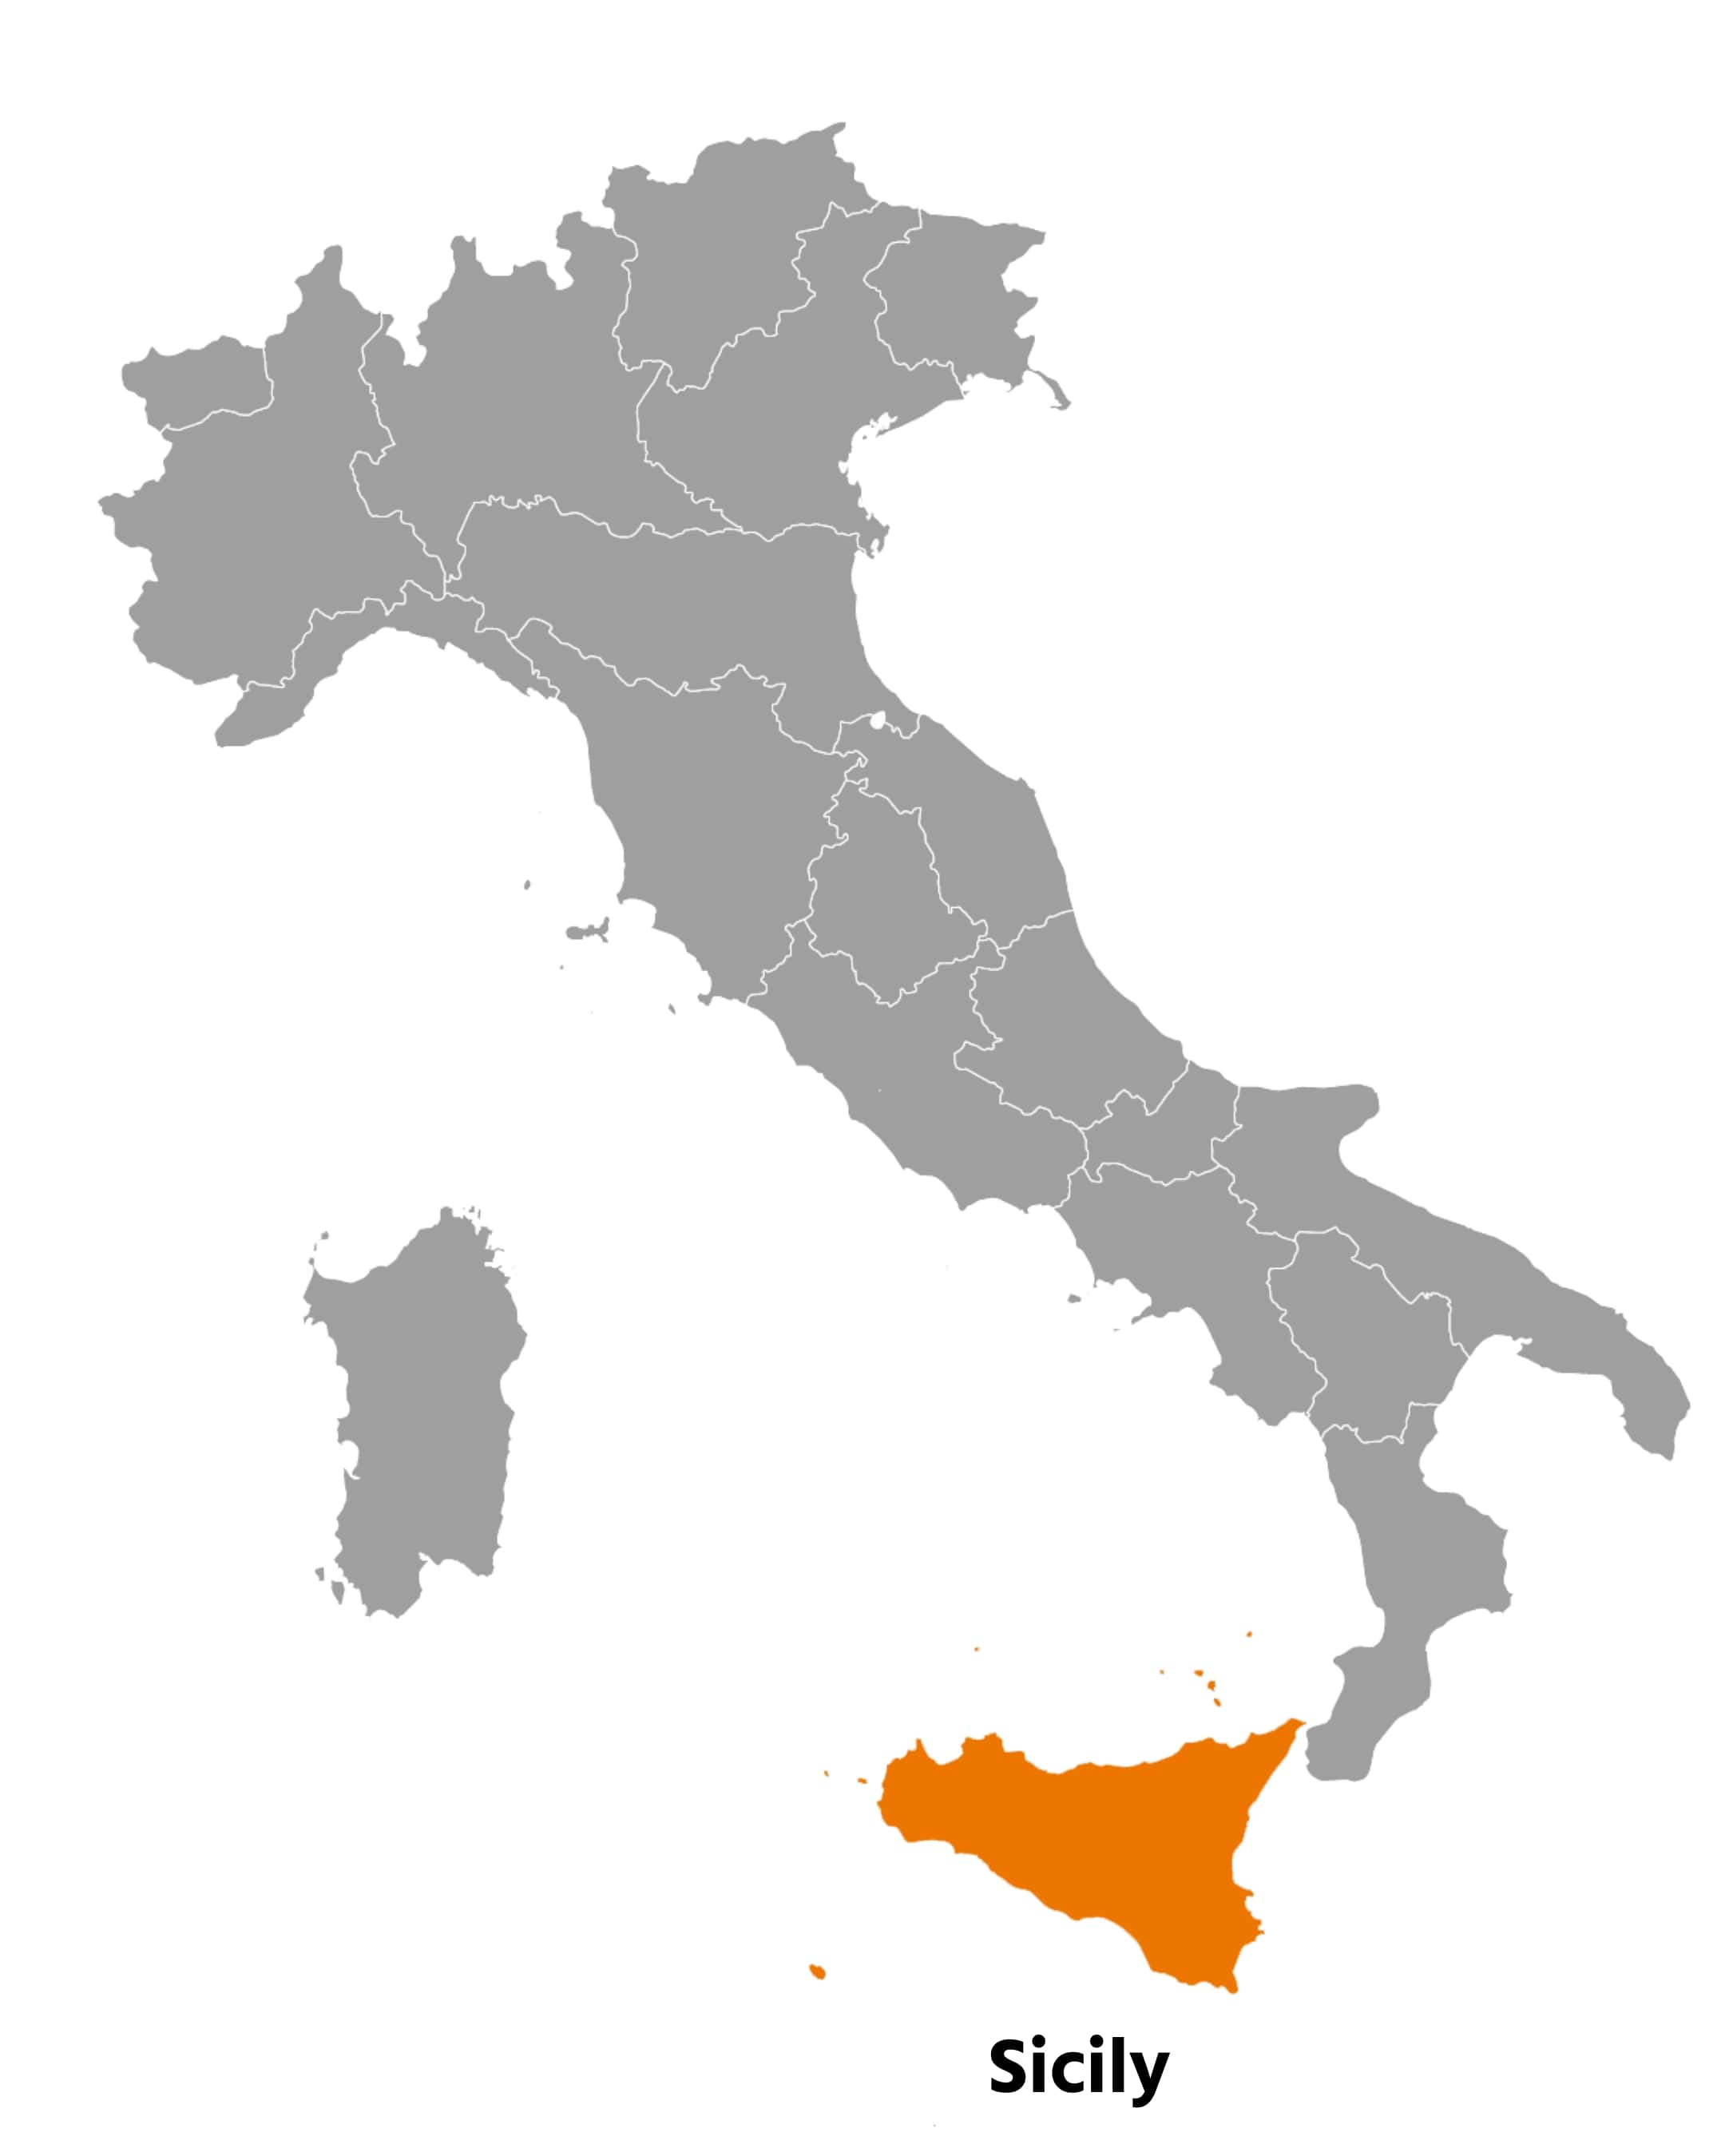 sicily on the map of italy